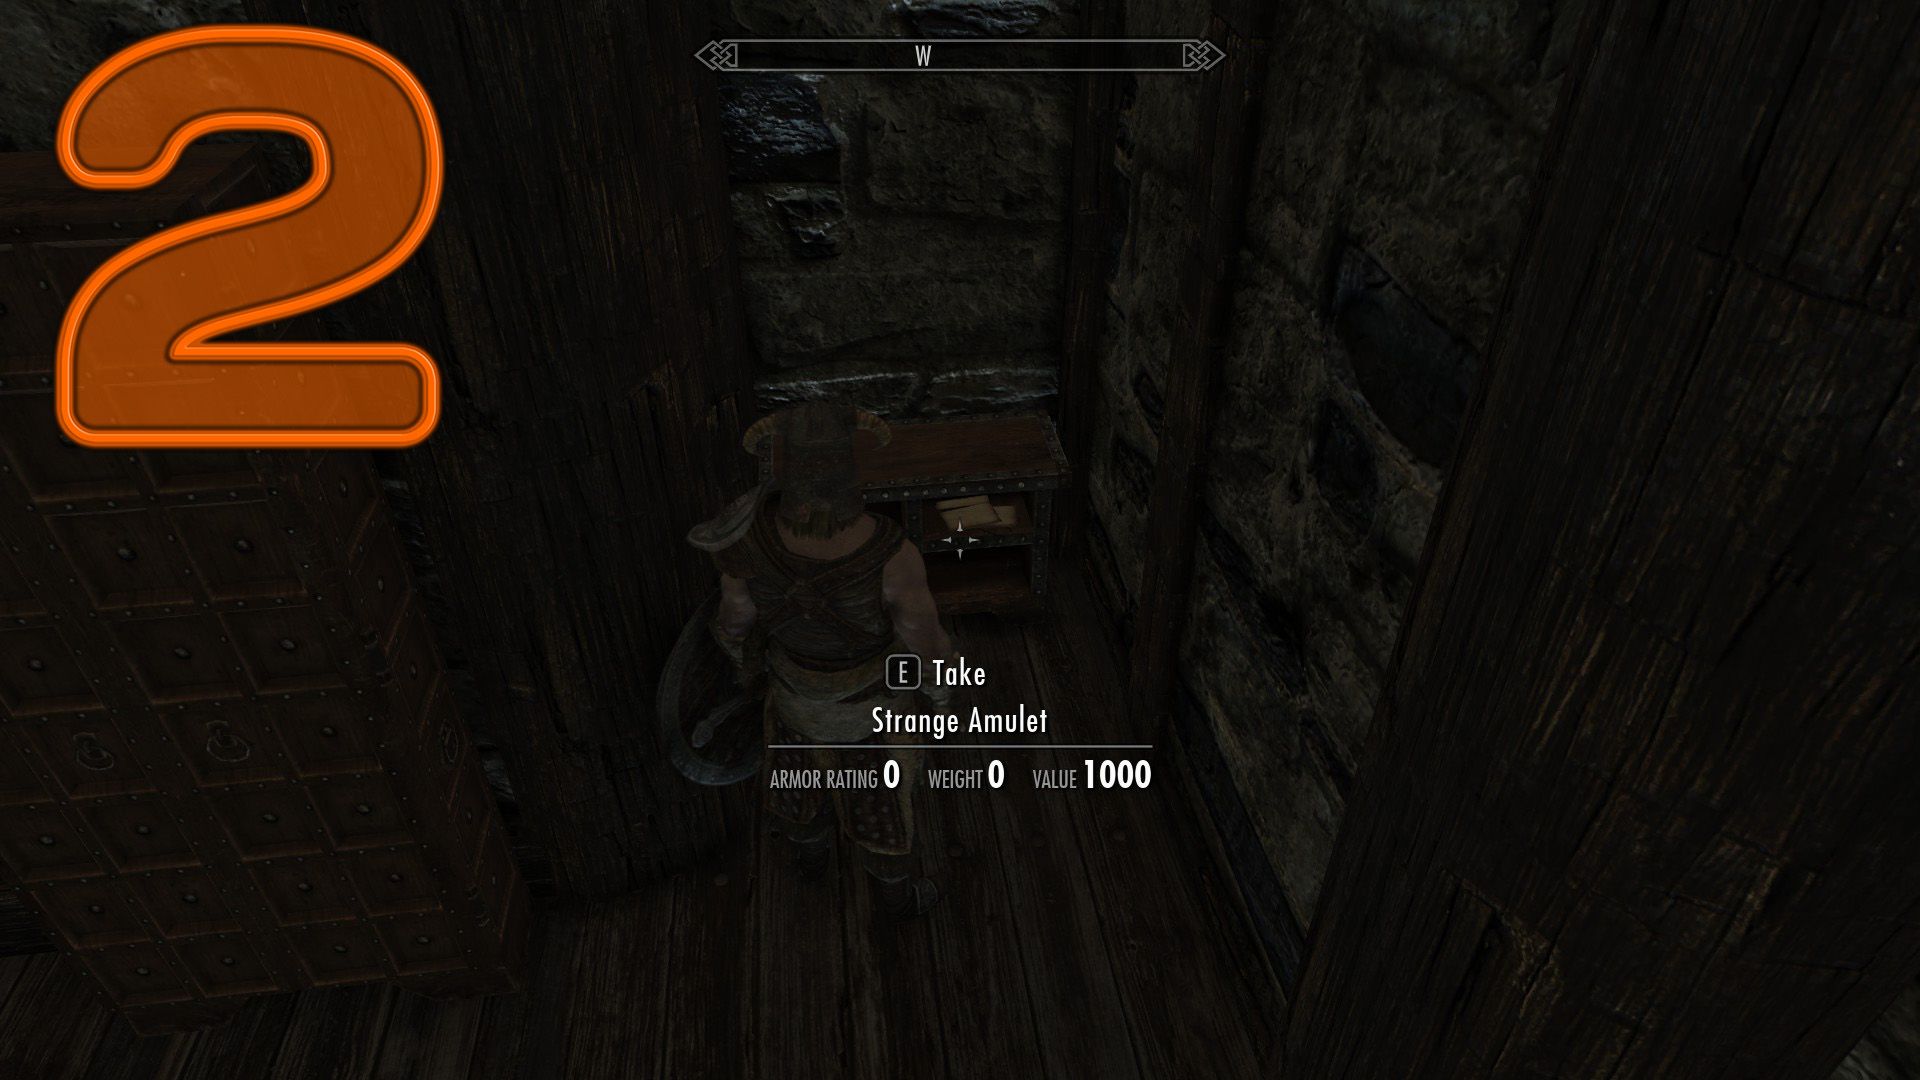 An annotated screenshot showing the location of an amulet in an abandoned house